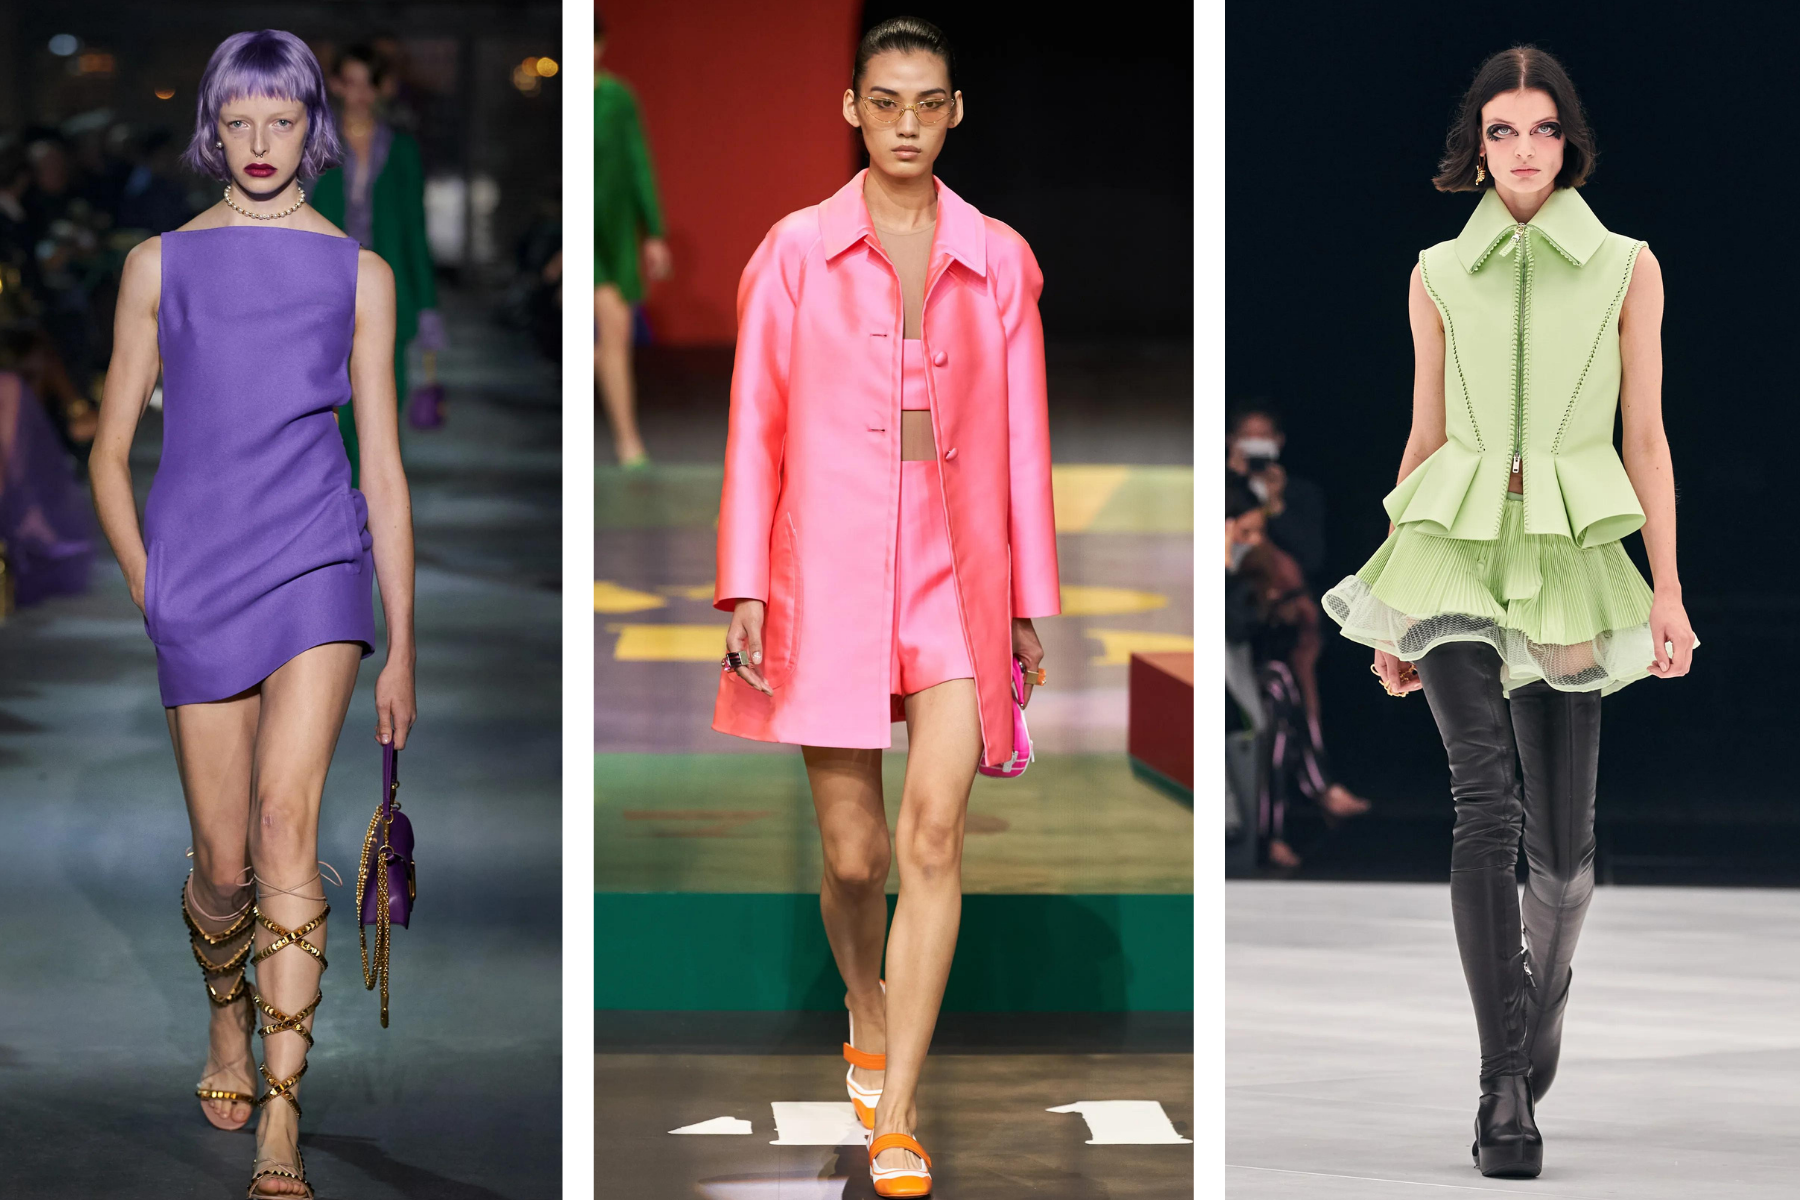 The 90s and 00s fashion trends that reigned on the runway for SS 22